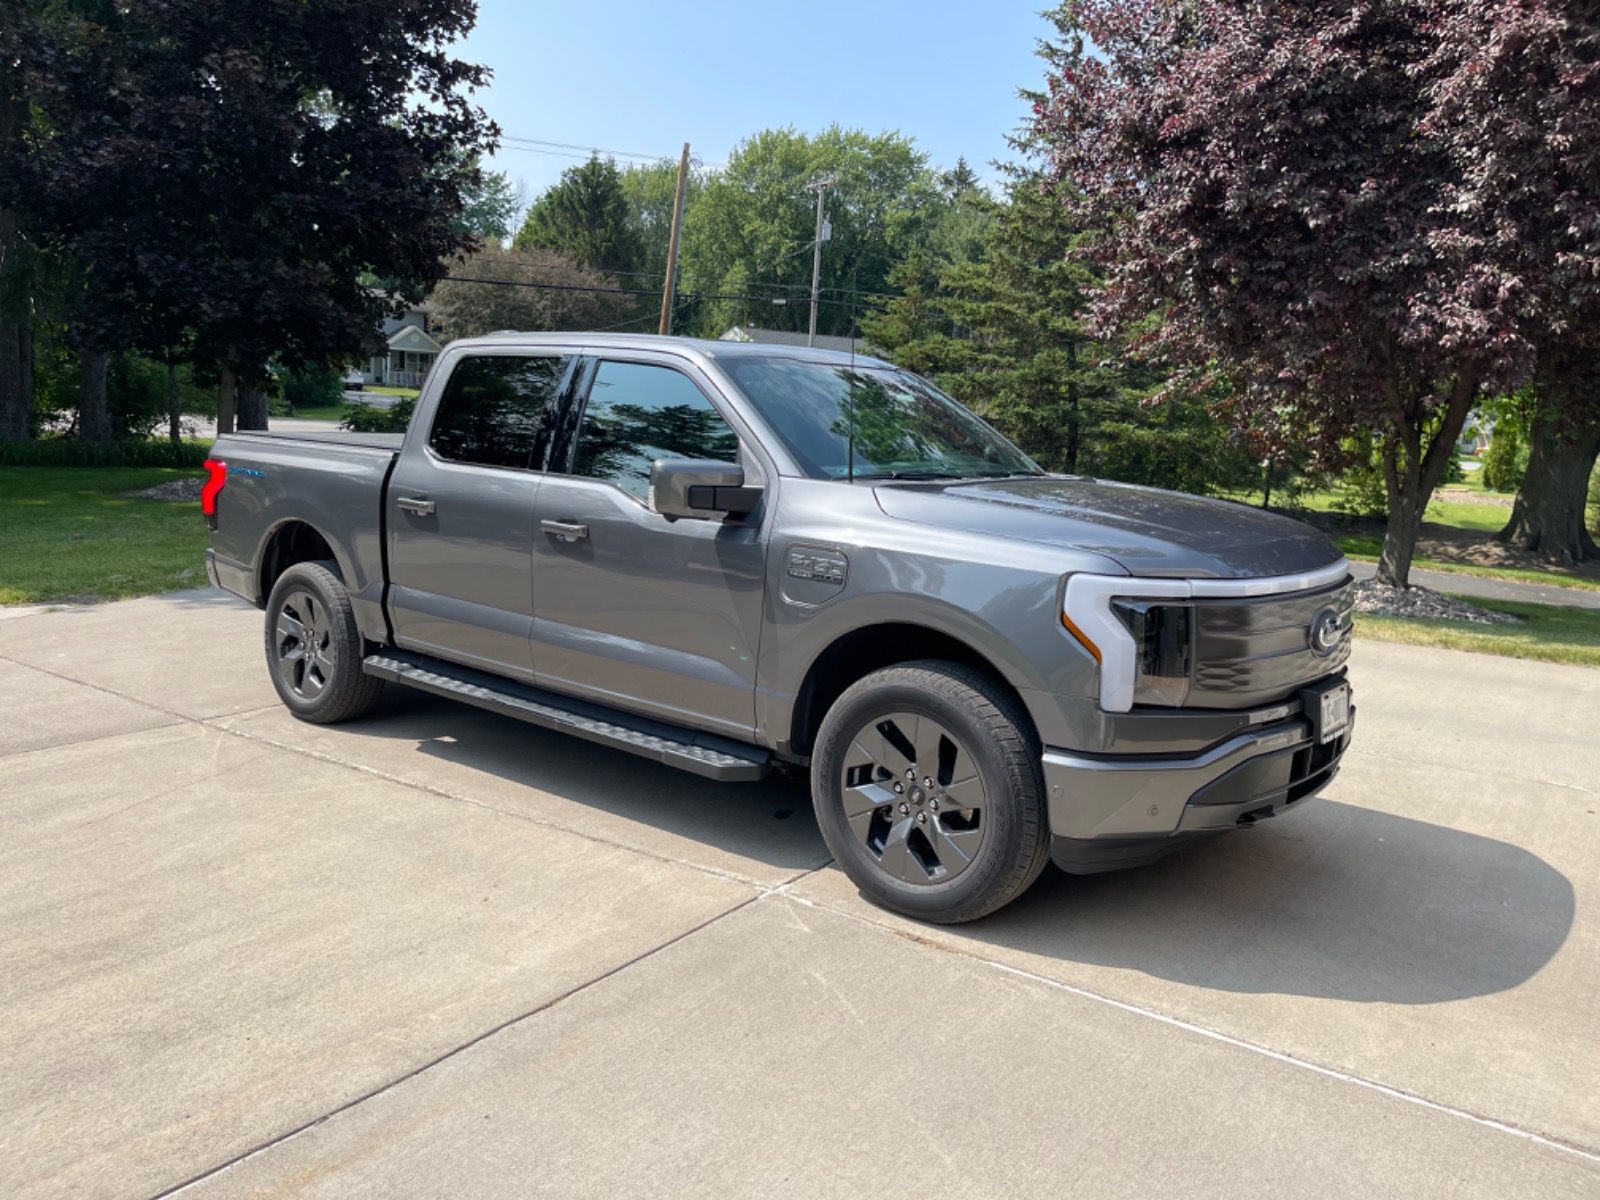 2022 Ford F-150 Lightning Lariat - Find My Electric